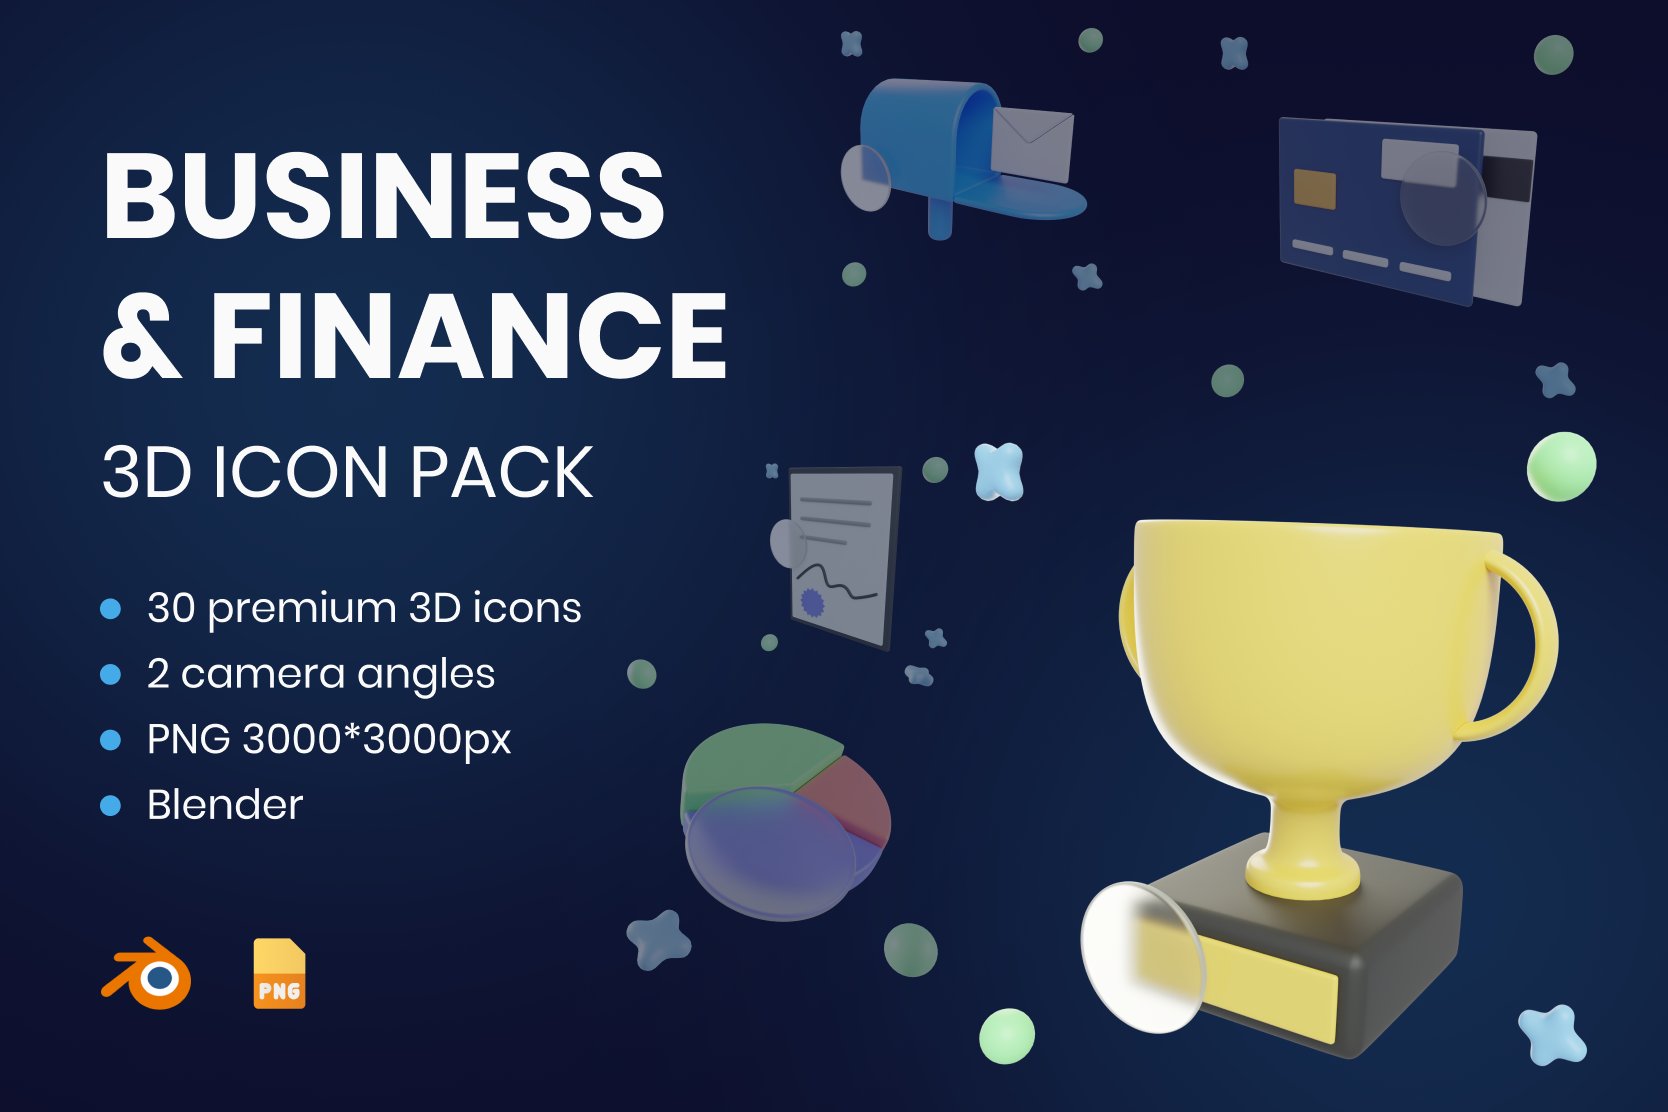 3D Business & Finance Icon Pack cover image.